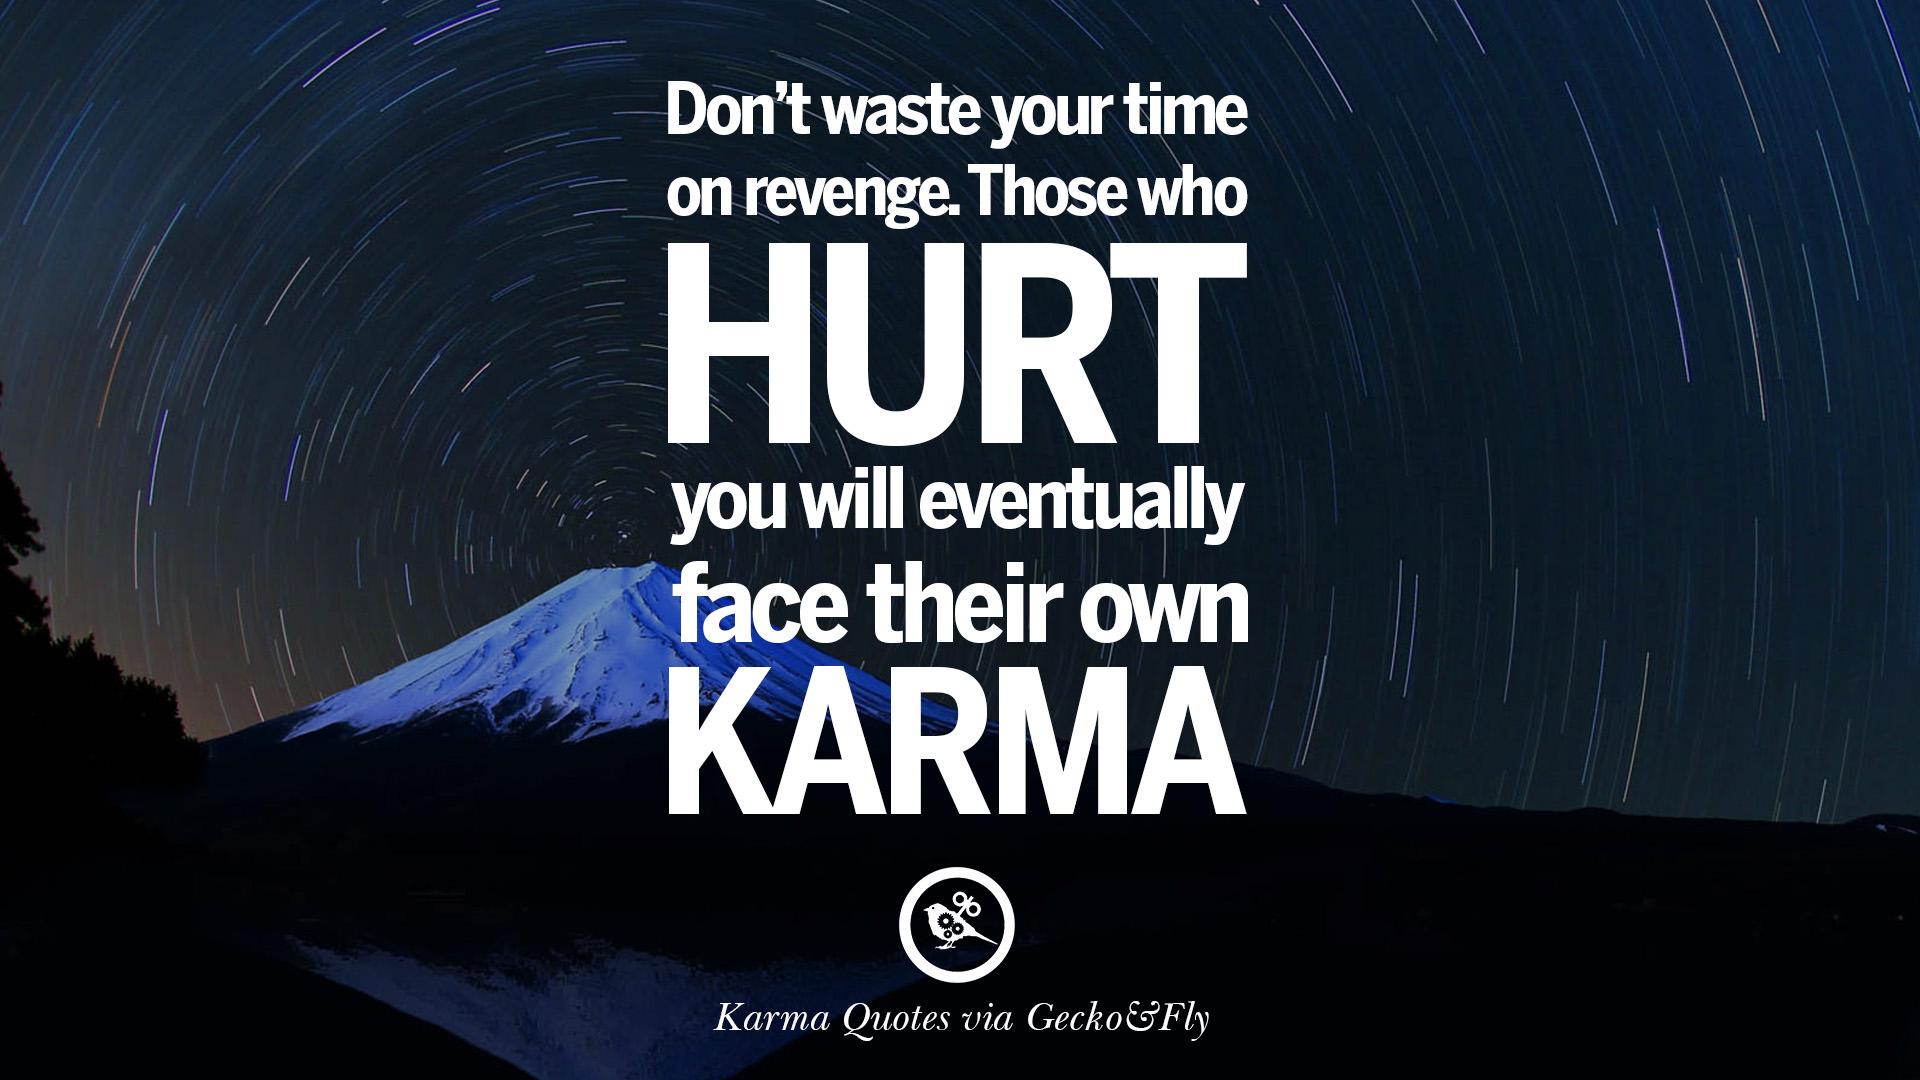 Don t waste your time on revenge Those who hurt you will eventually face their own karma